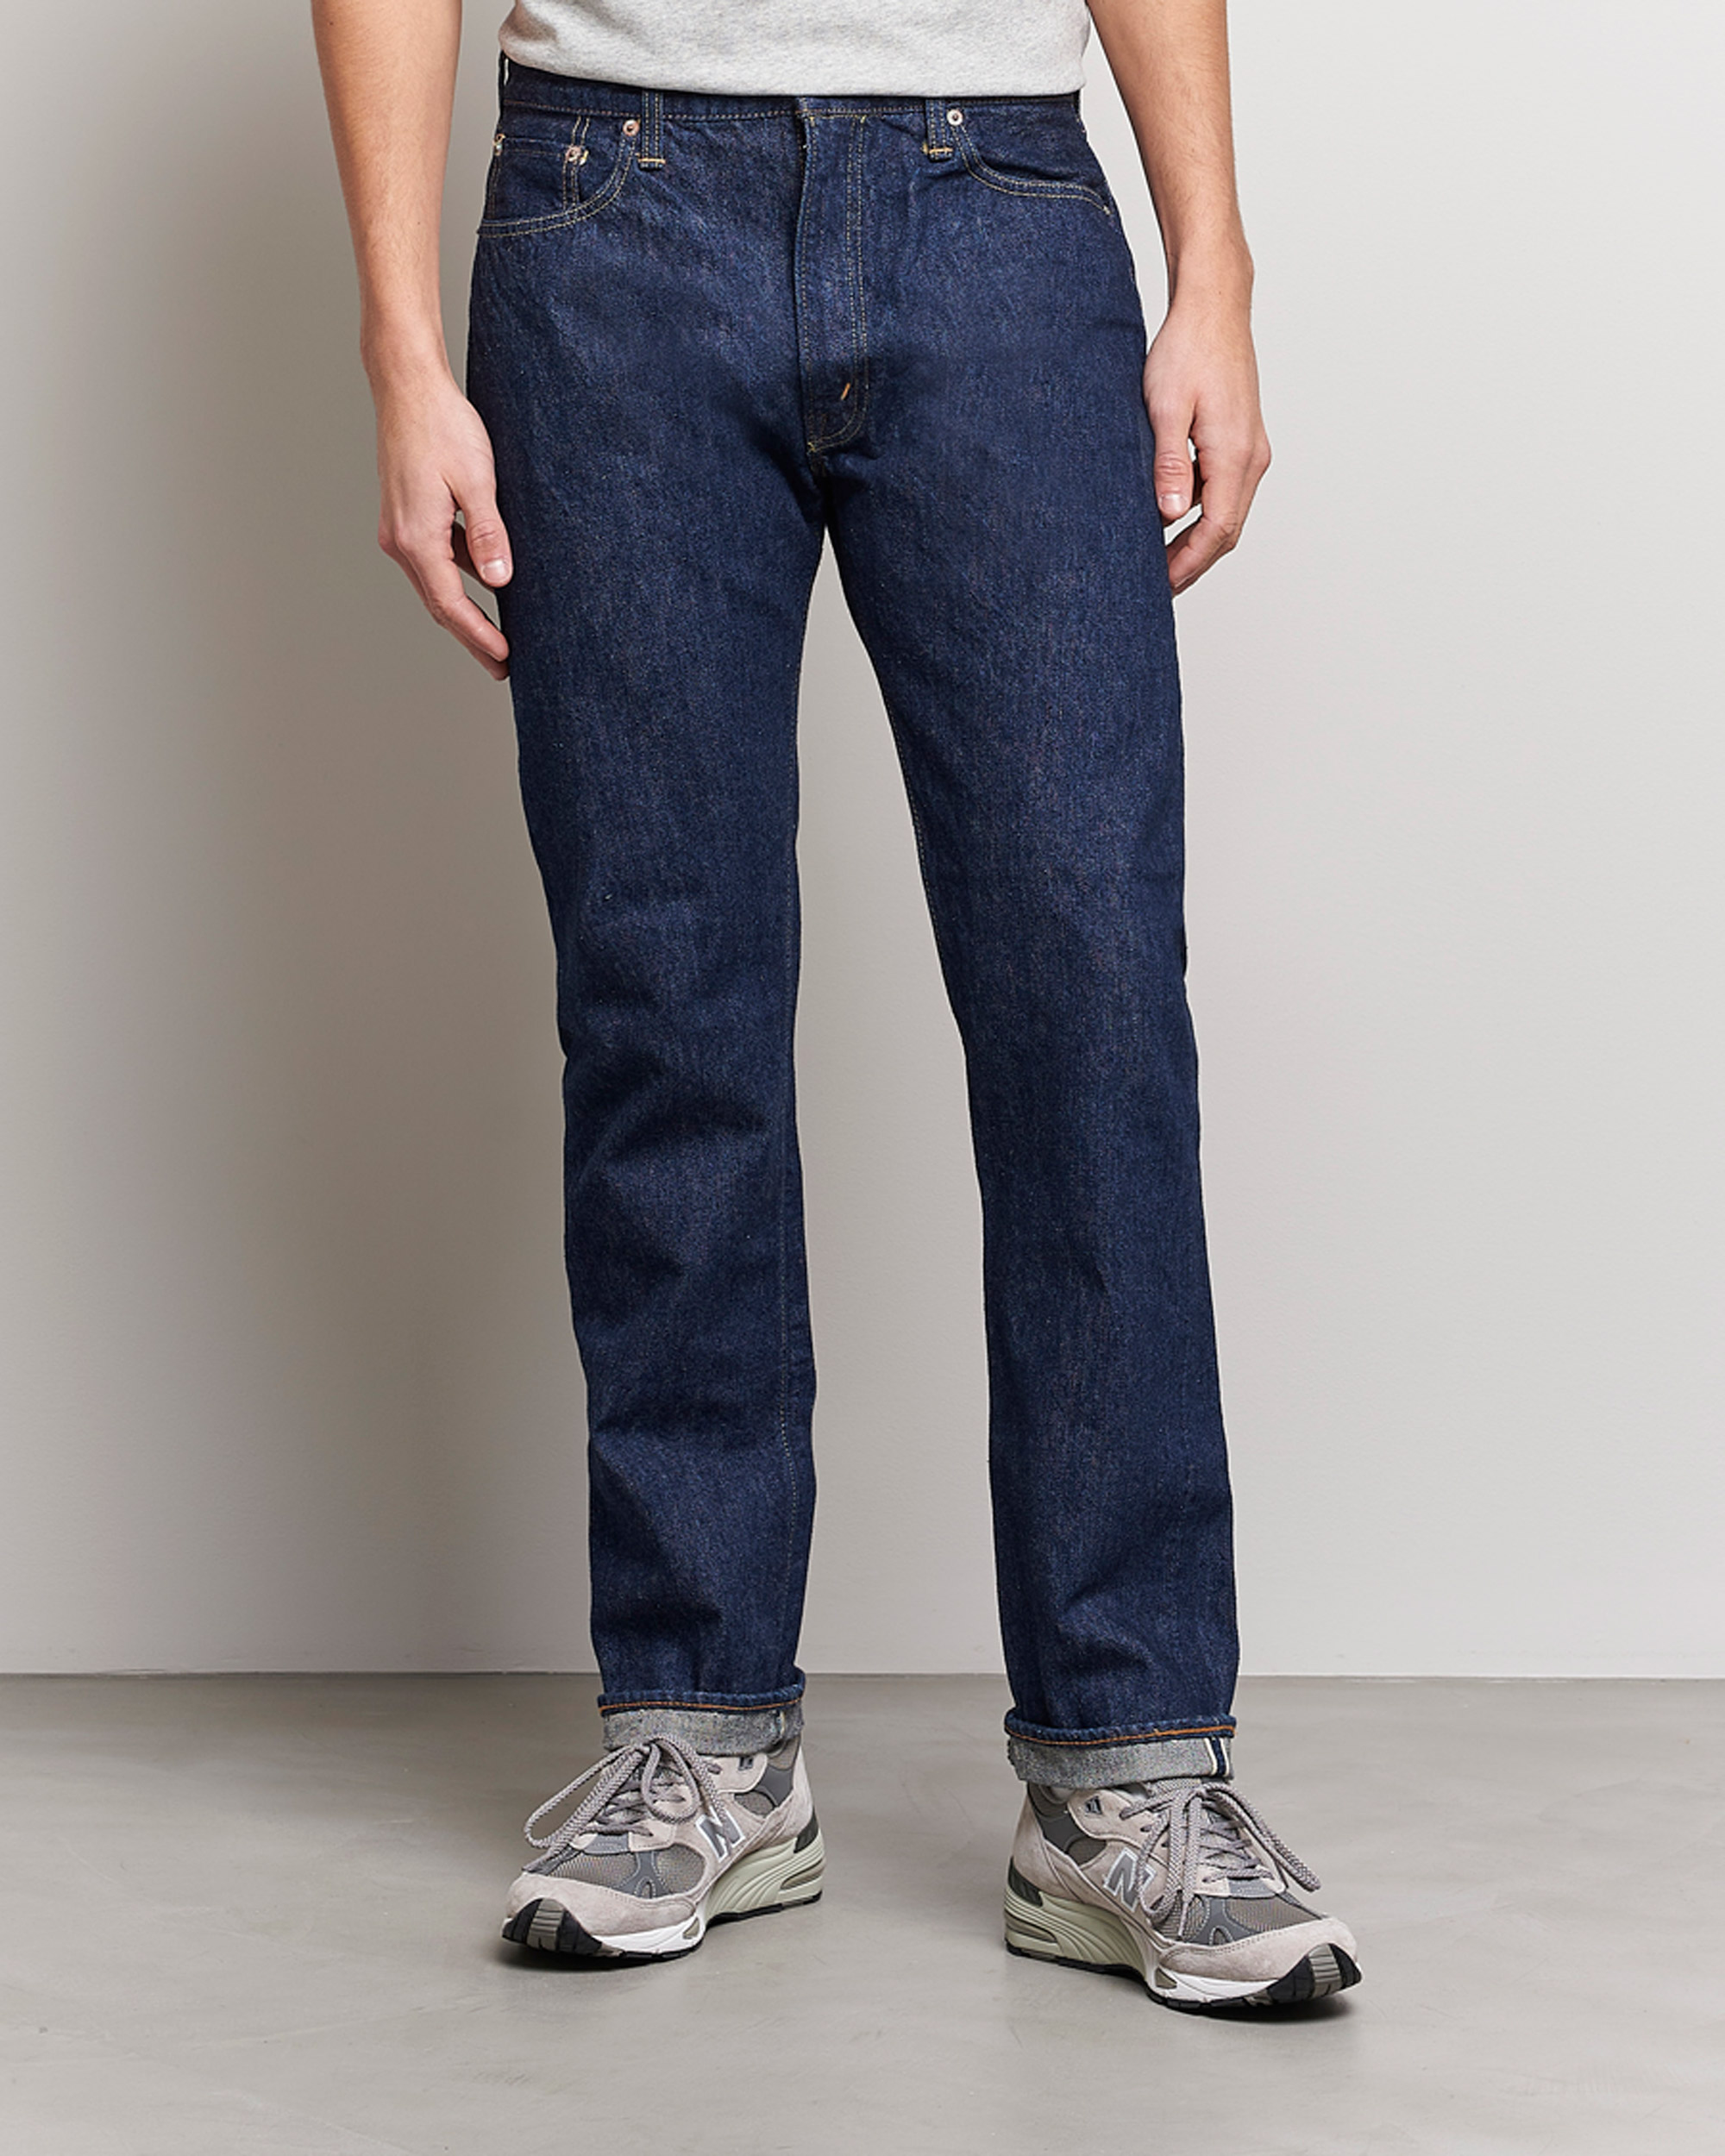 Hombres | Vaqueros azules | orSlow | Tapered Fit 107 Selvedge Jeans One Wash